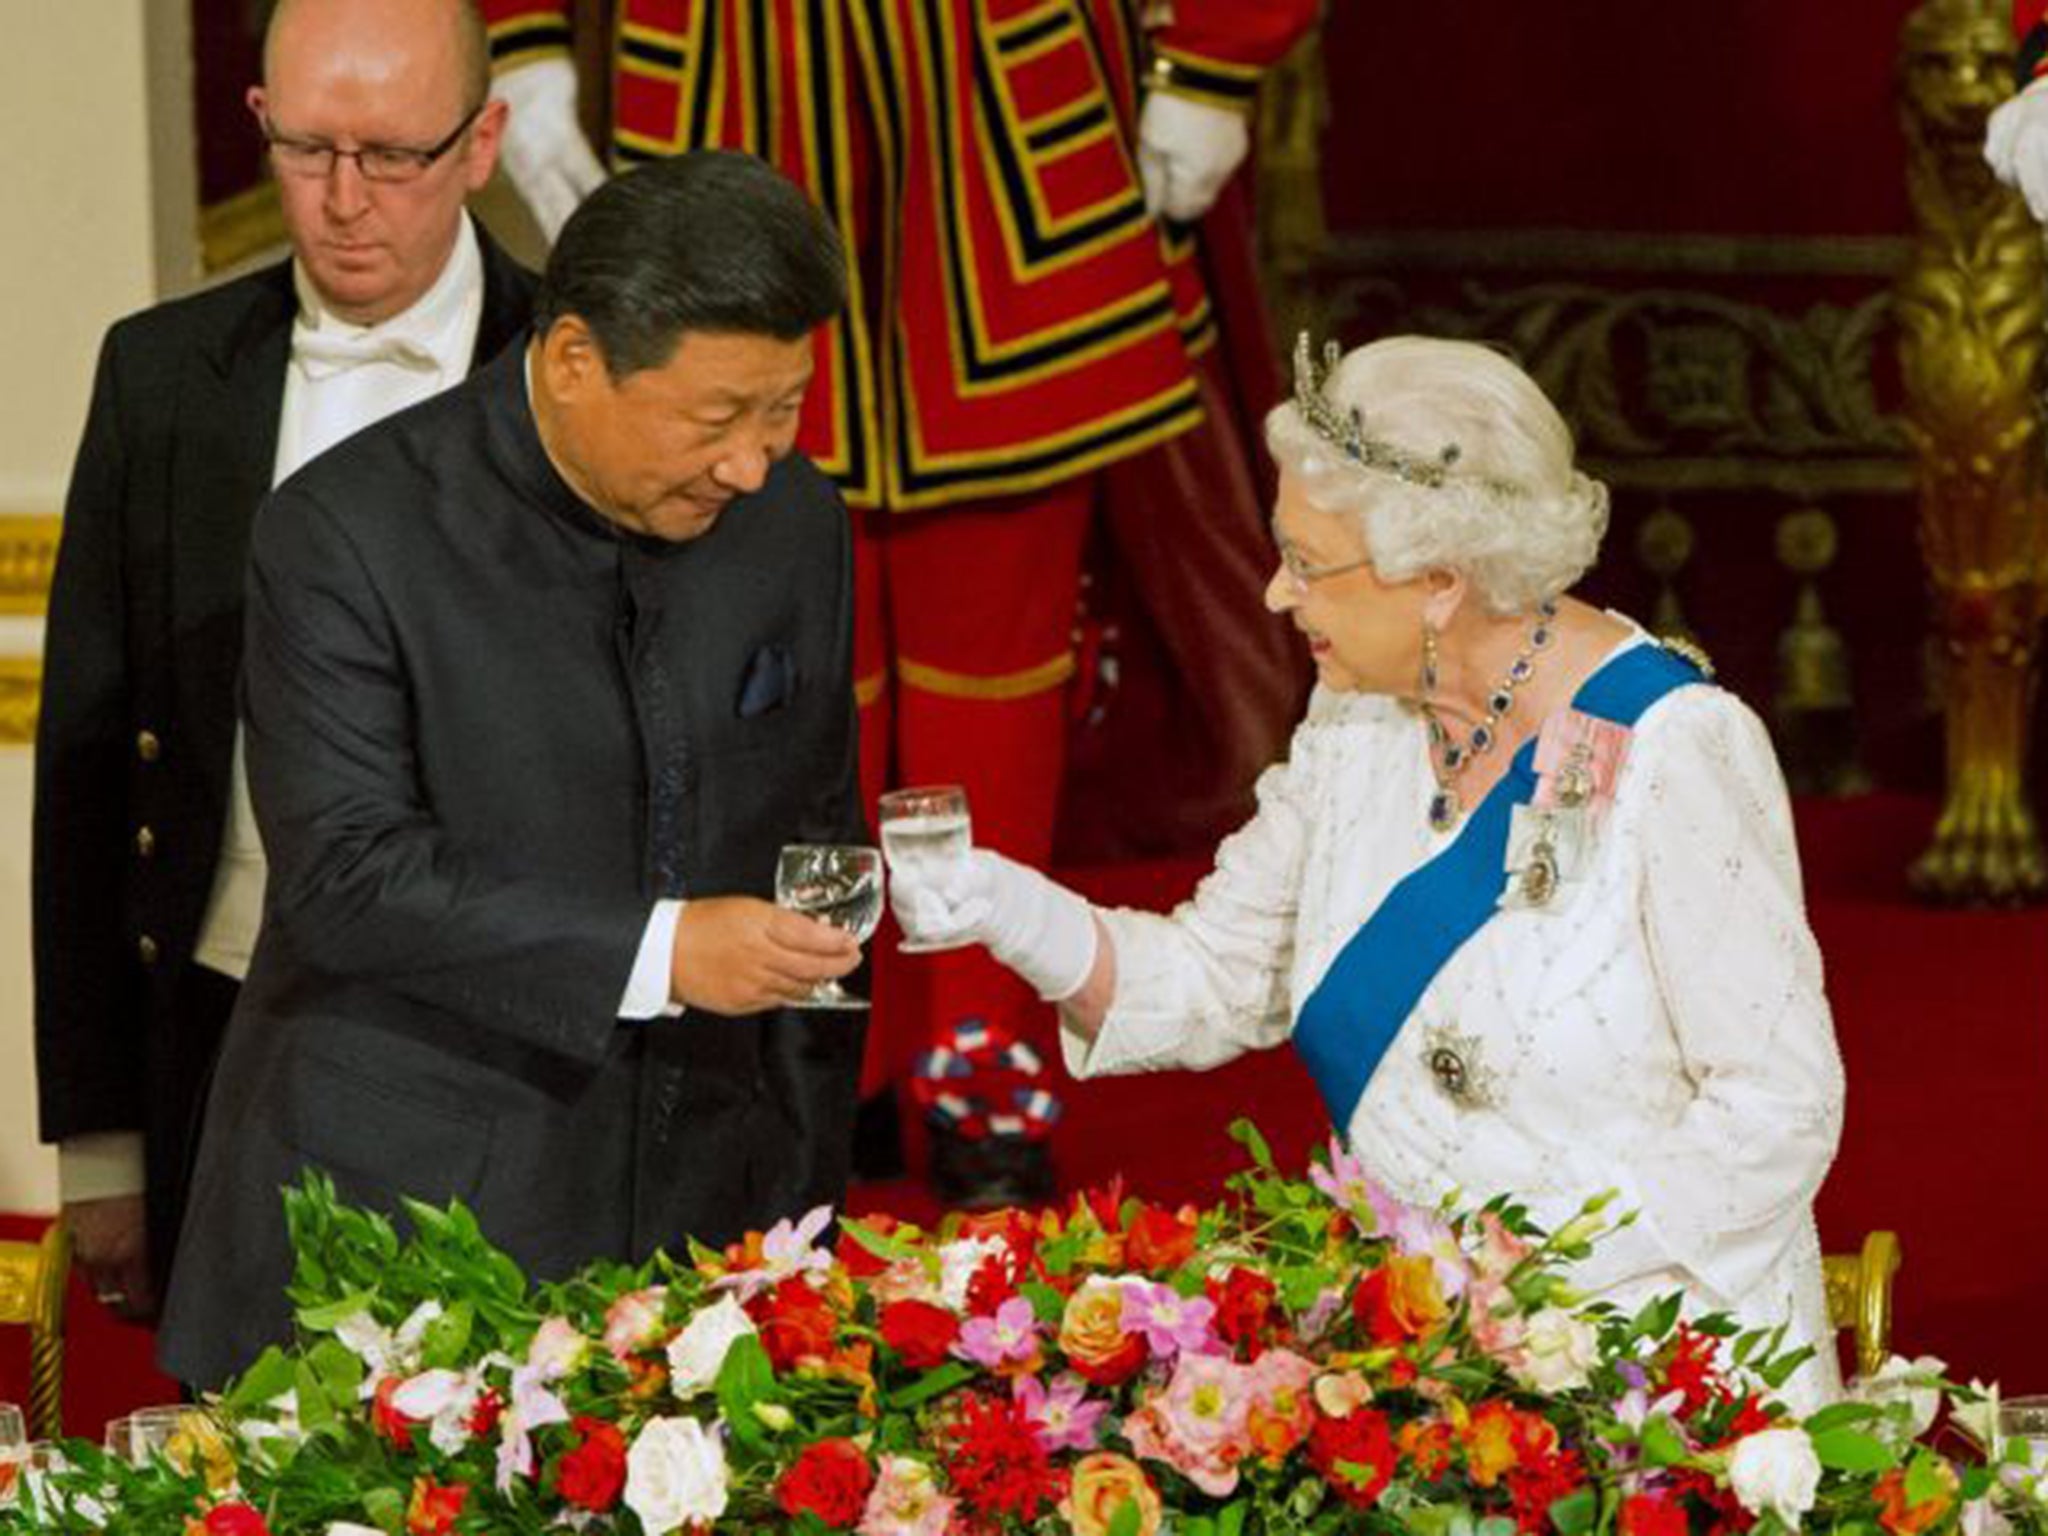 The Queen with China’s President Xi Jinping. They drank British Ridgeview sparking wine during the banquet